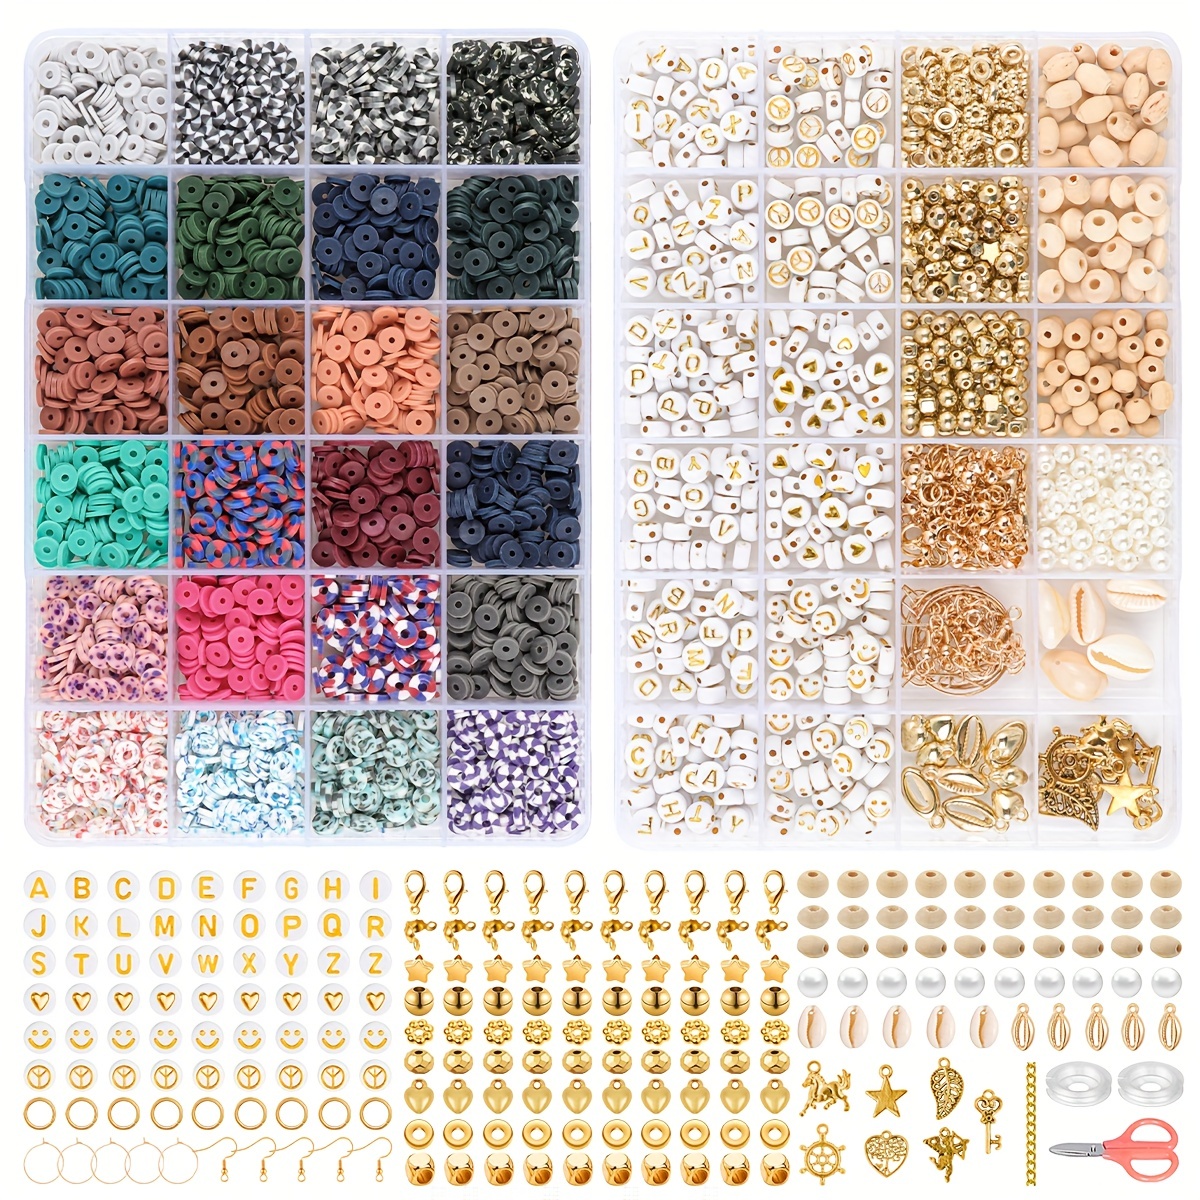 Bead Making Kit on Sale  5100pc. Clay Bead Set ONLY $5.99!